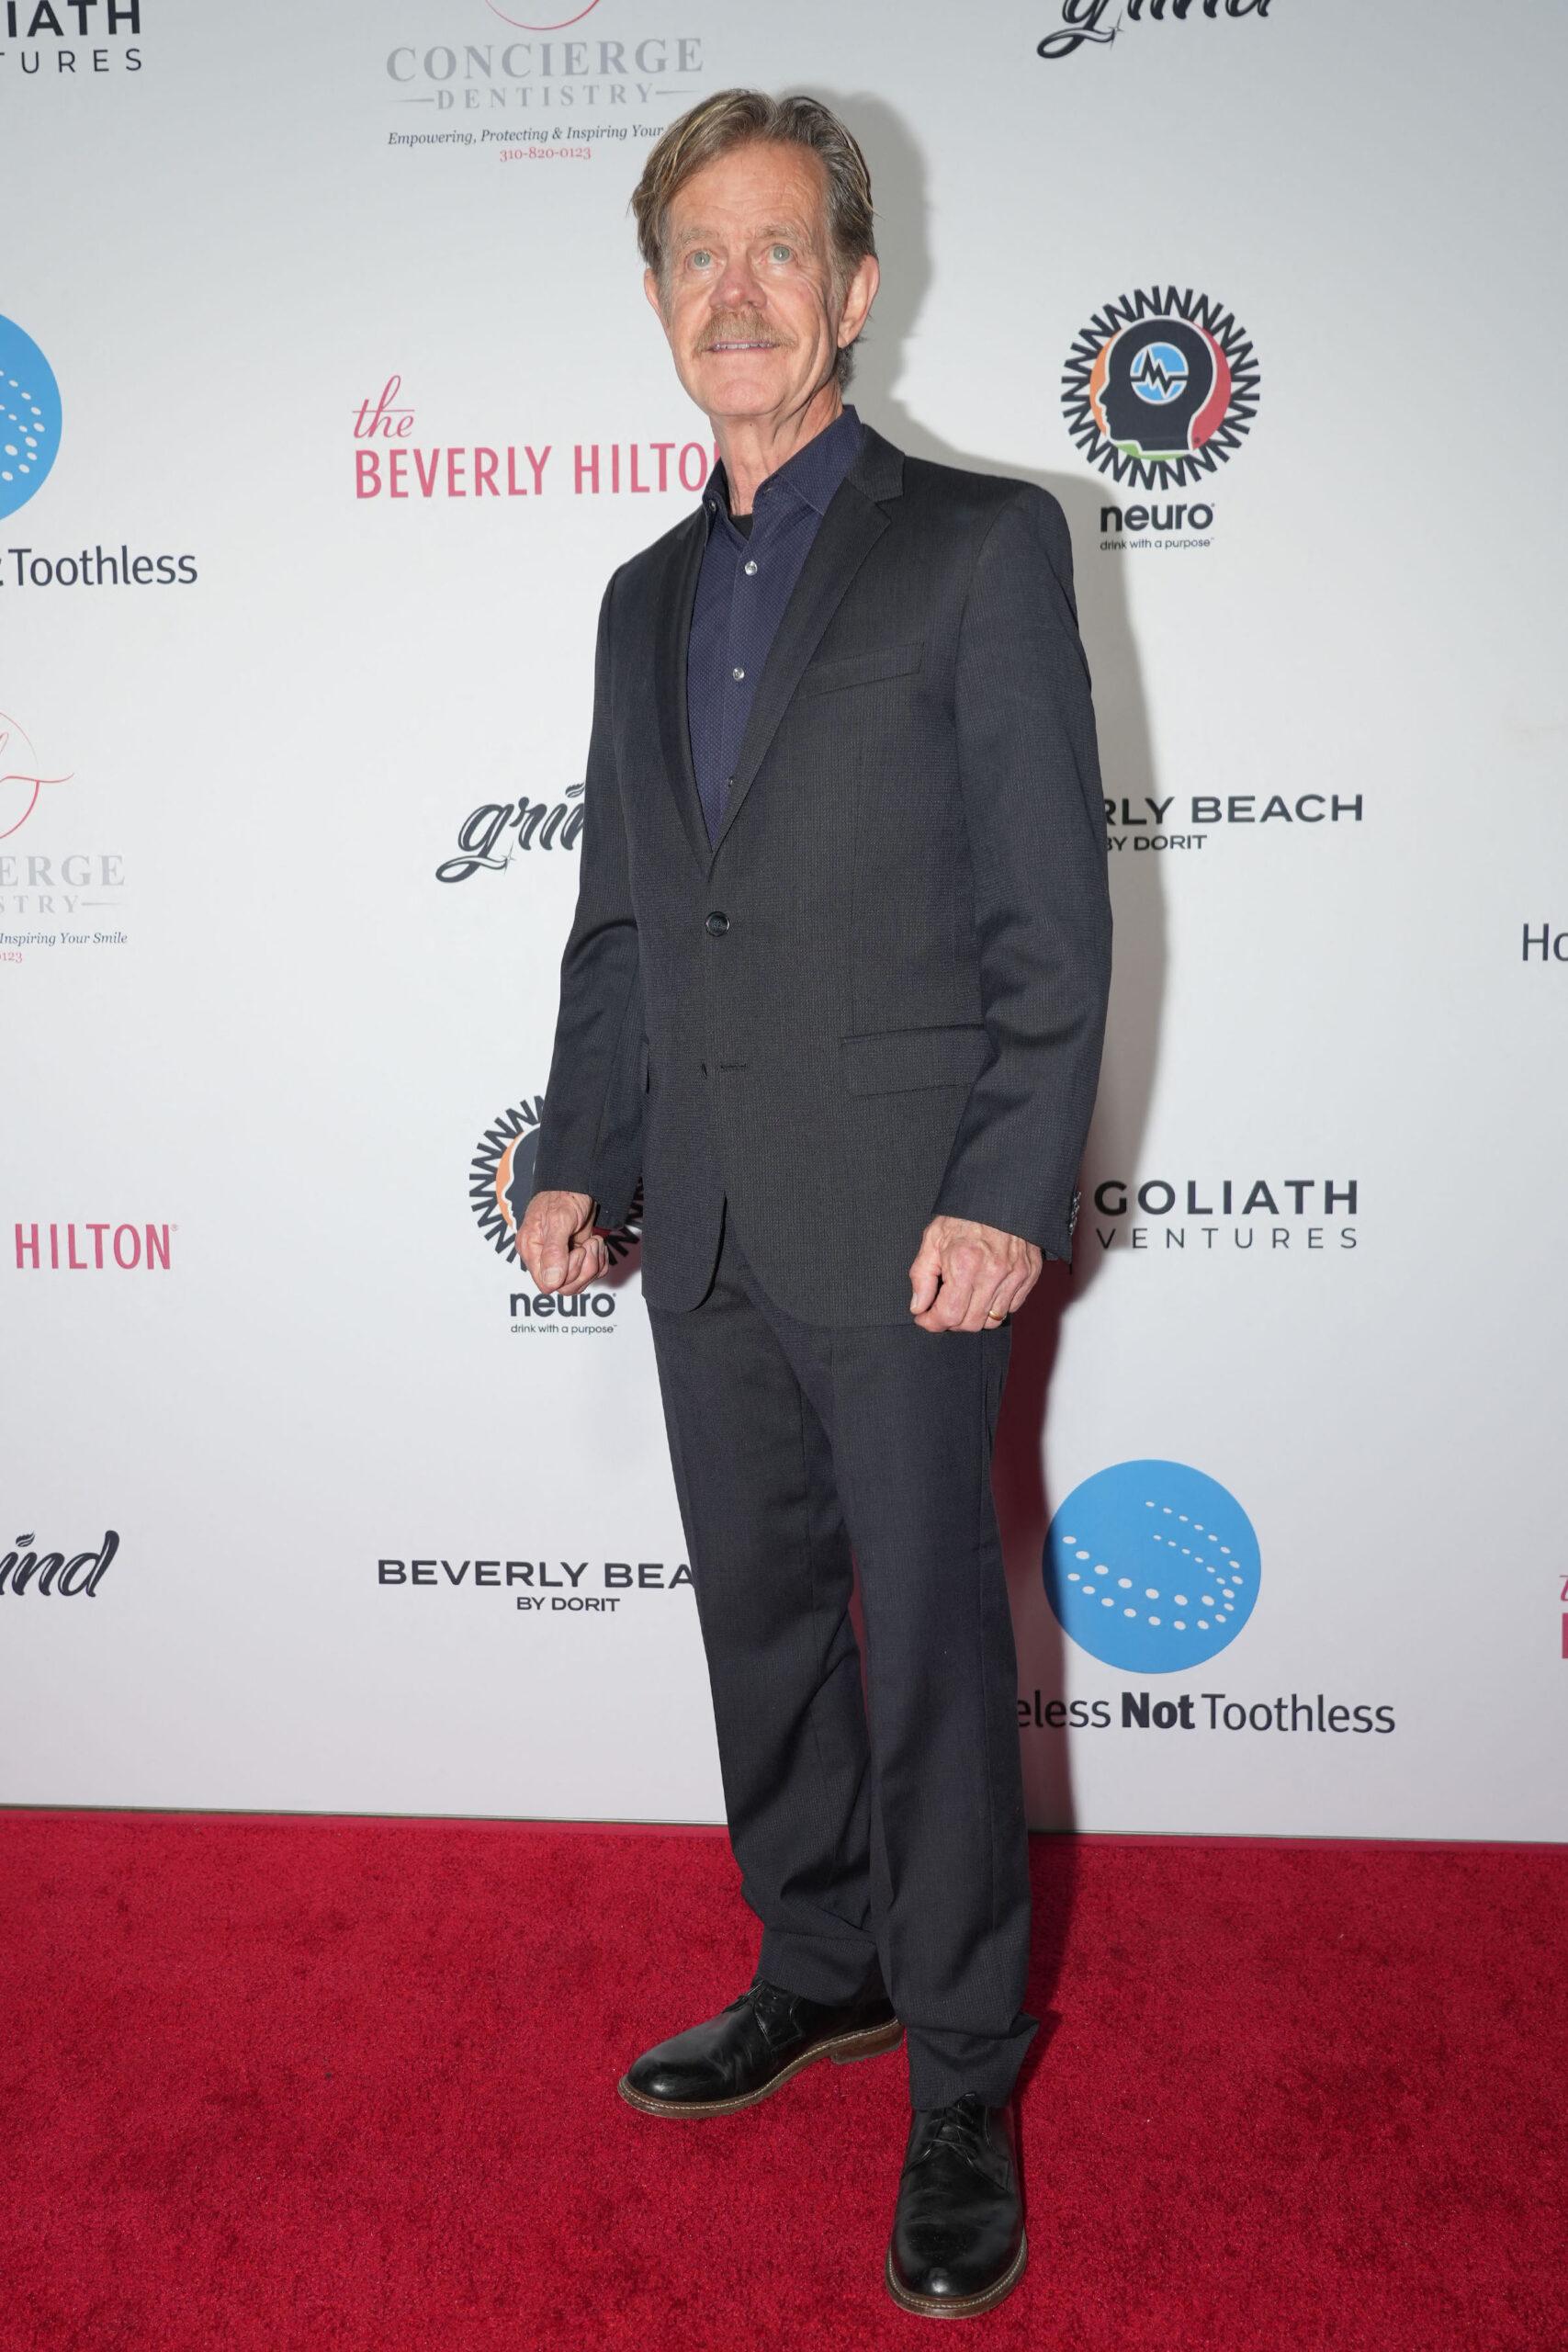 William H Macy attends charity event.